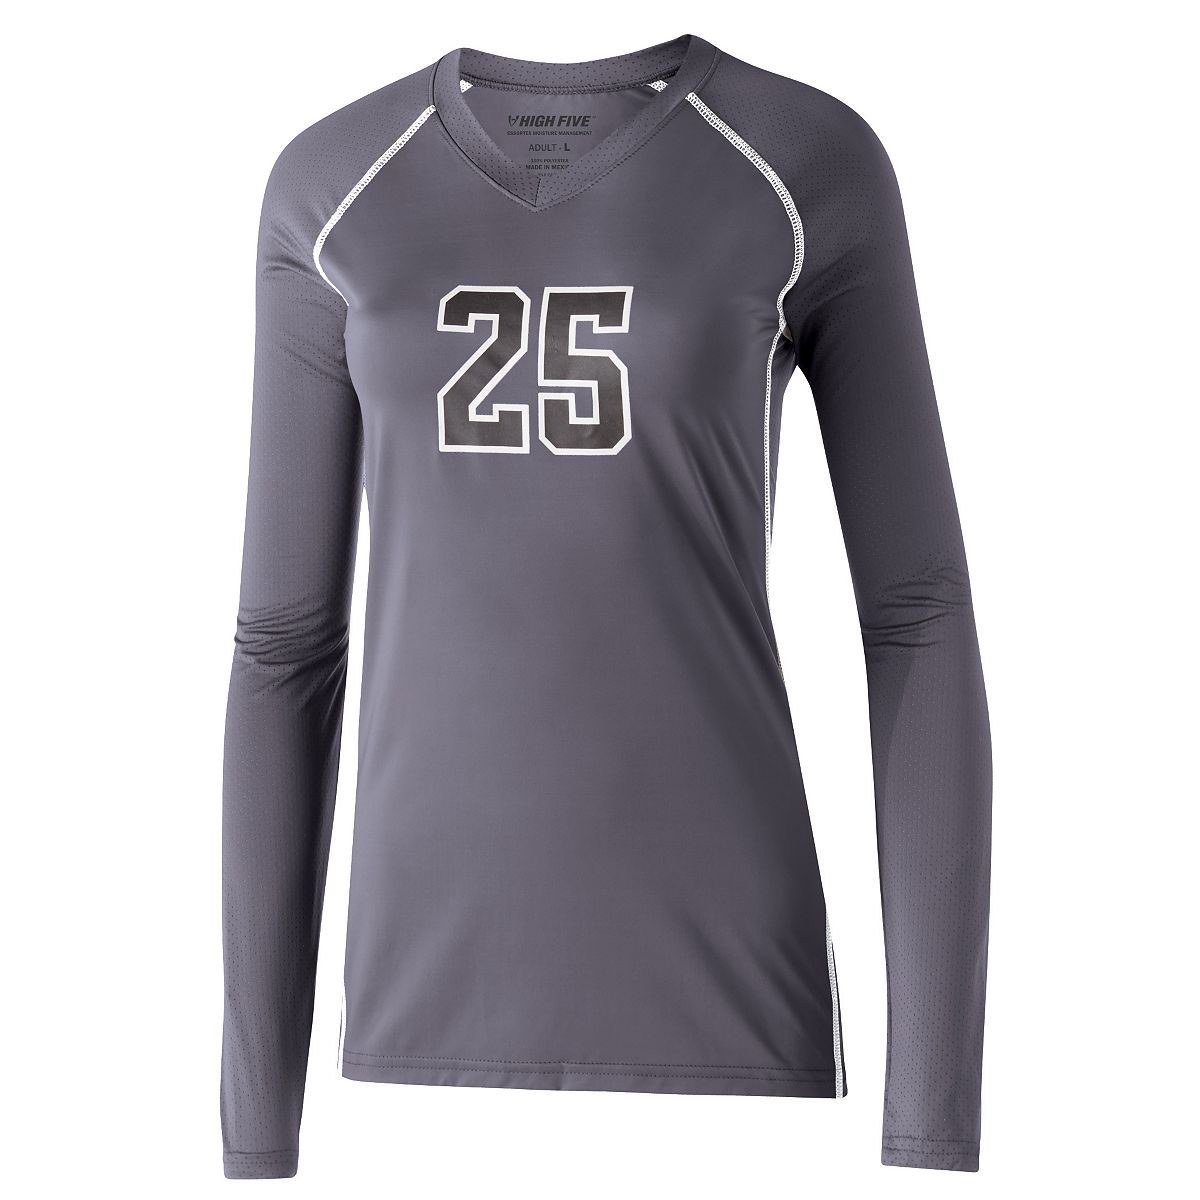 Girls' Solid Volleyball Jersey L/s